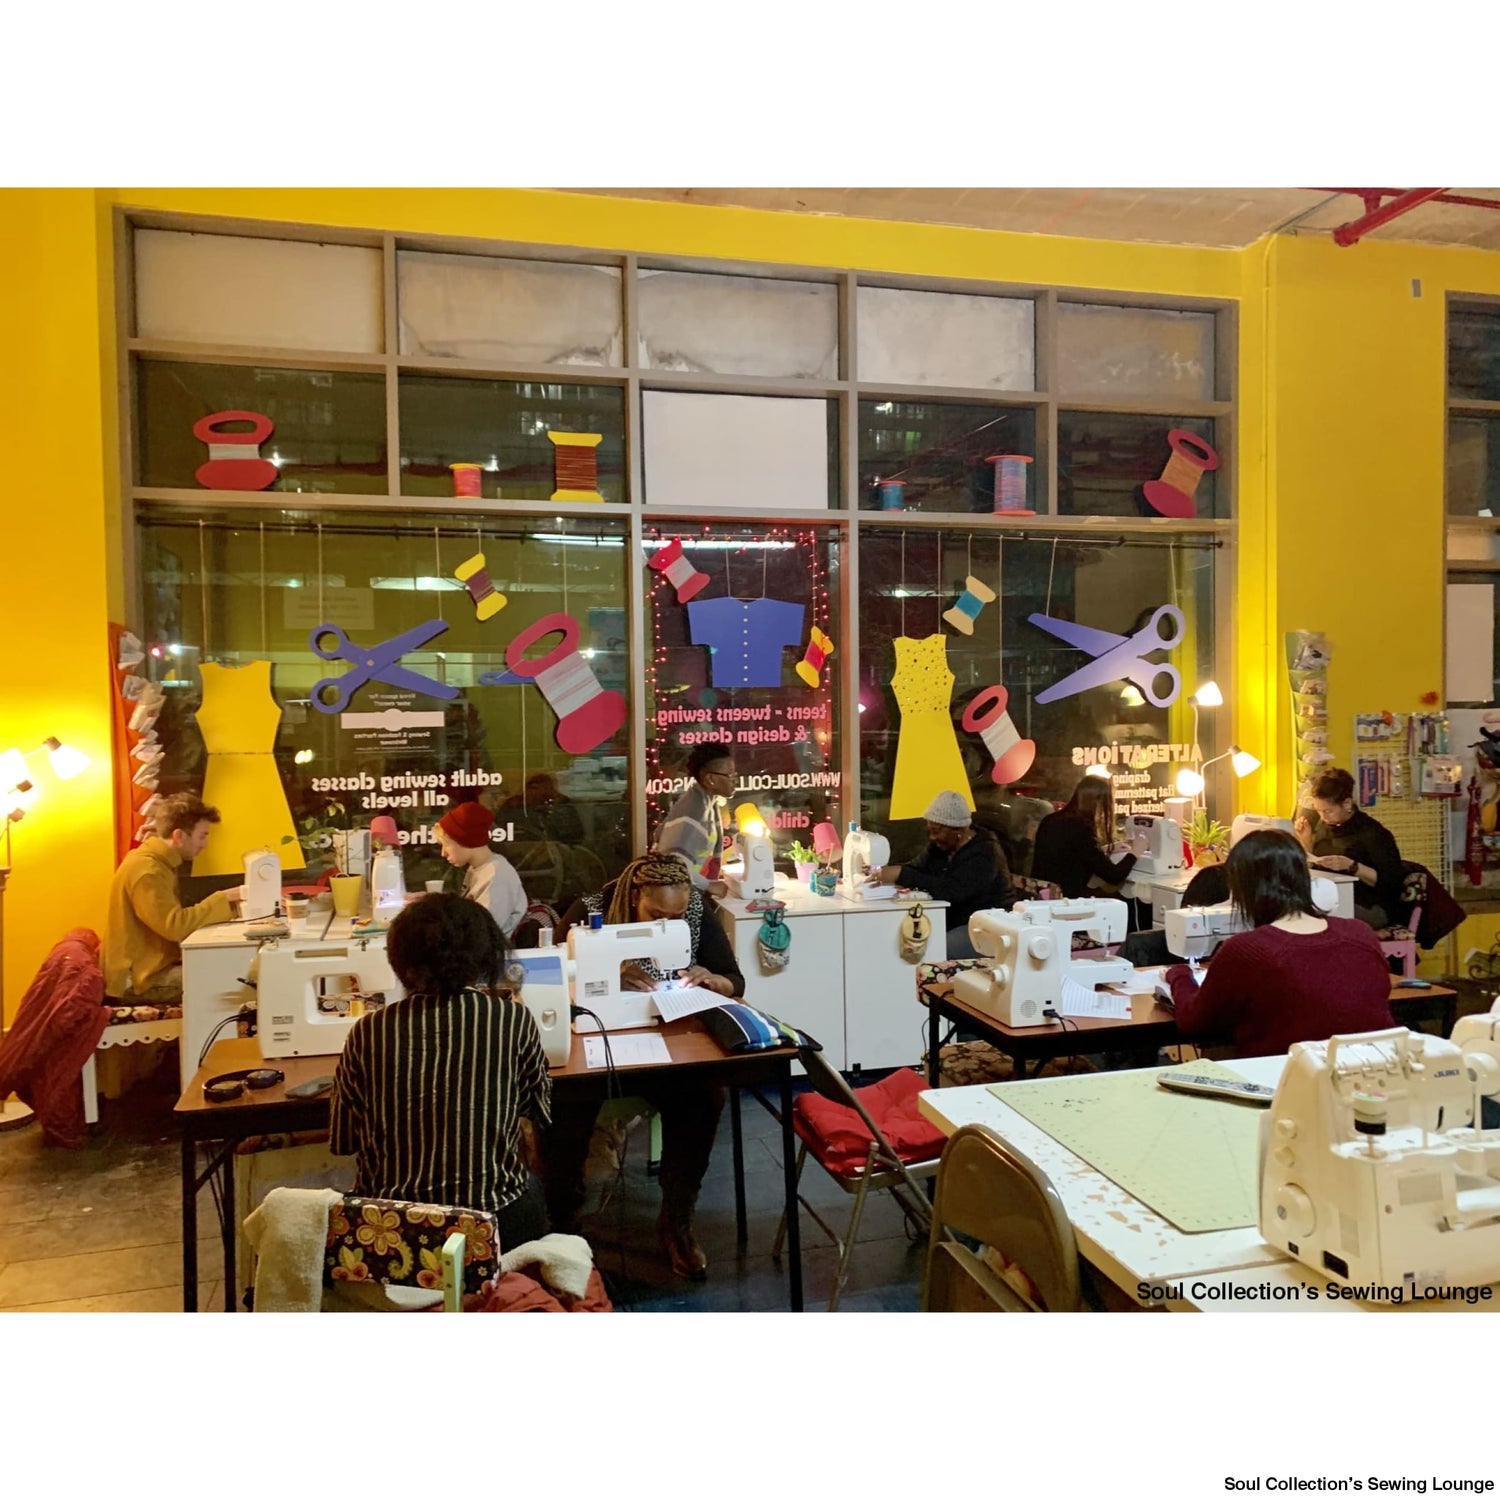 Beginners Sewing Classes - Sewing Classes